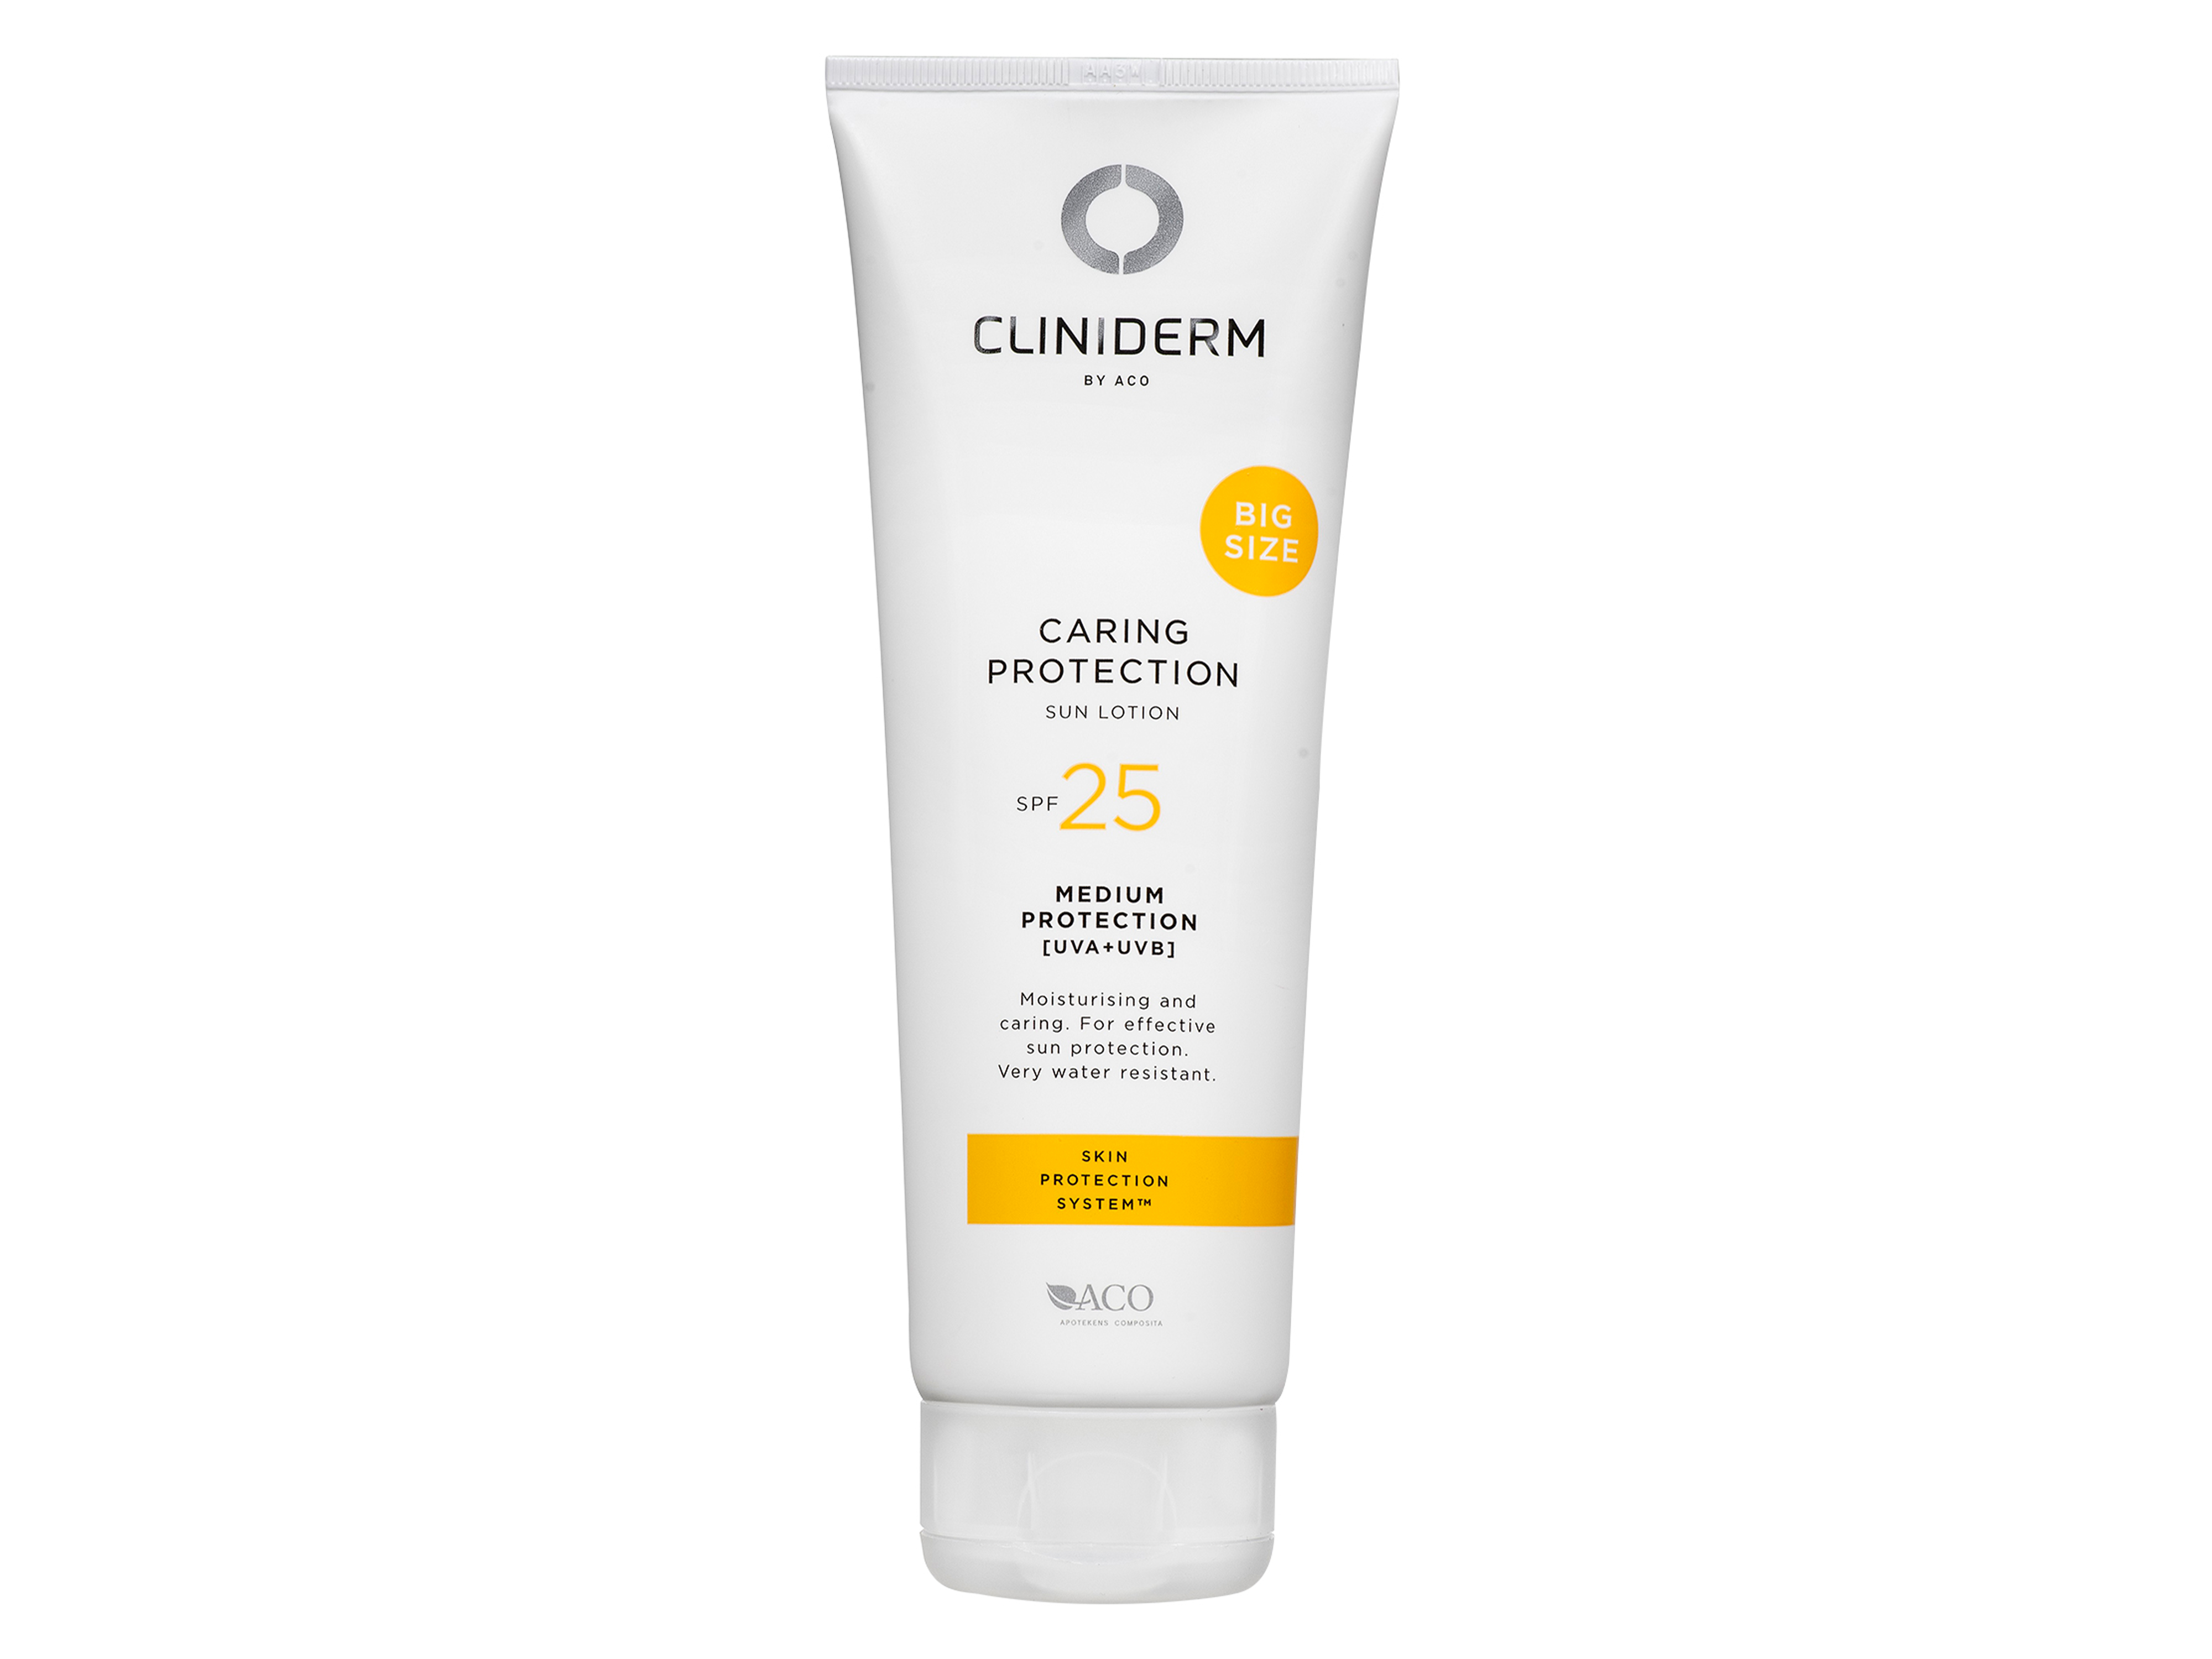 Cliniderm Caring Protection Sun Lotion, SPF 25, 250 ml